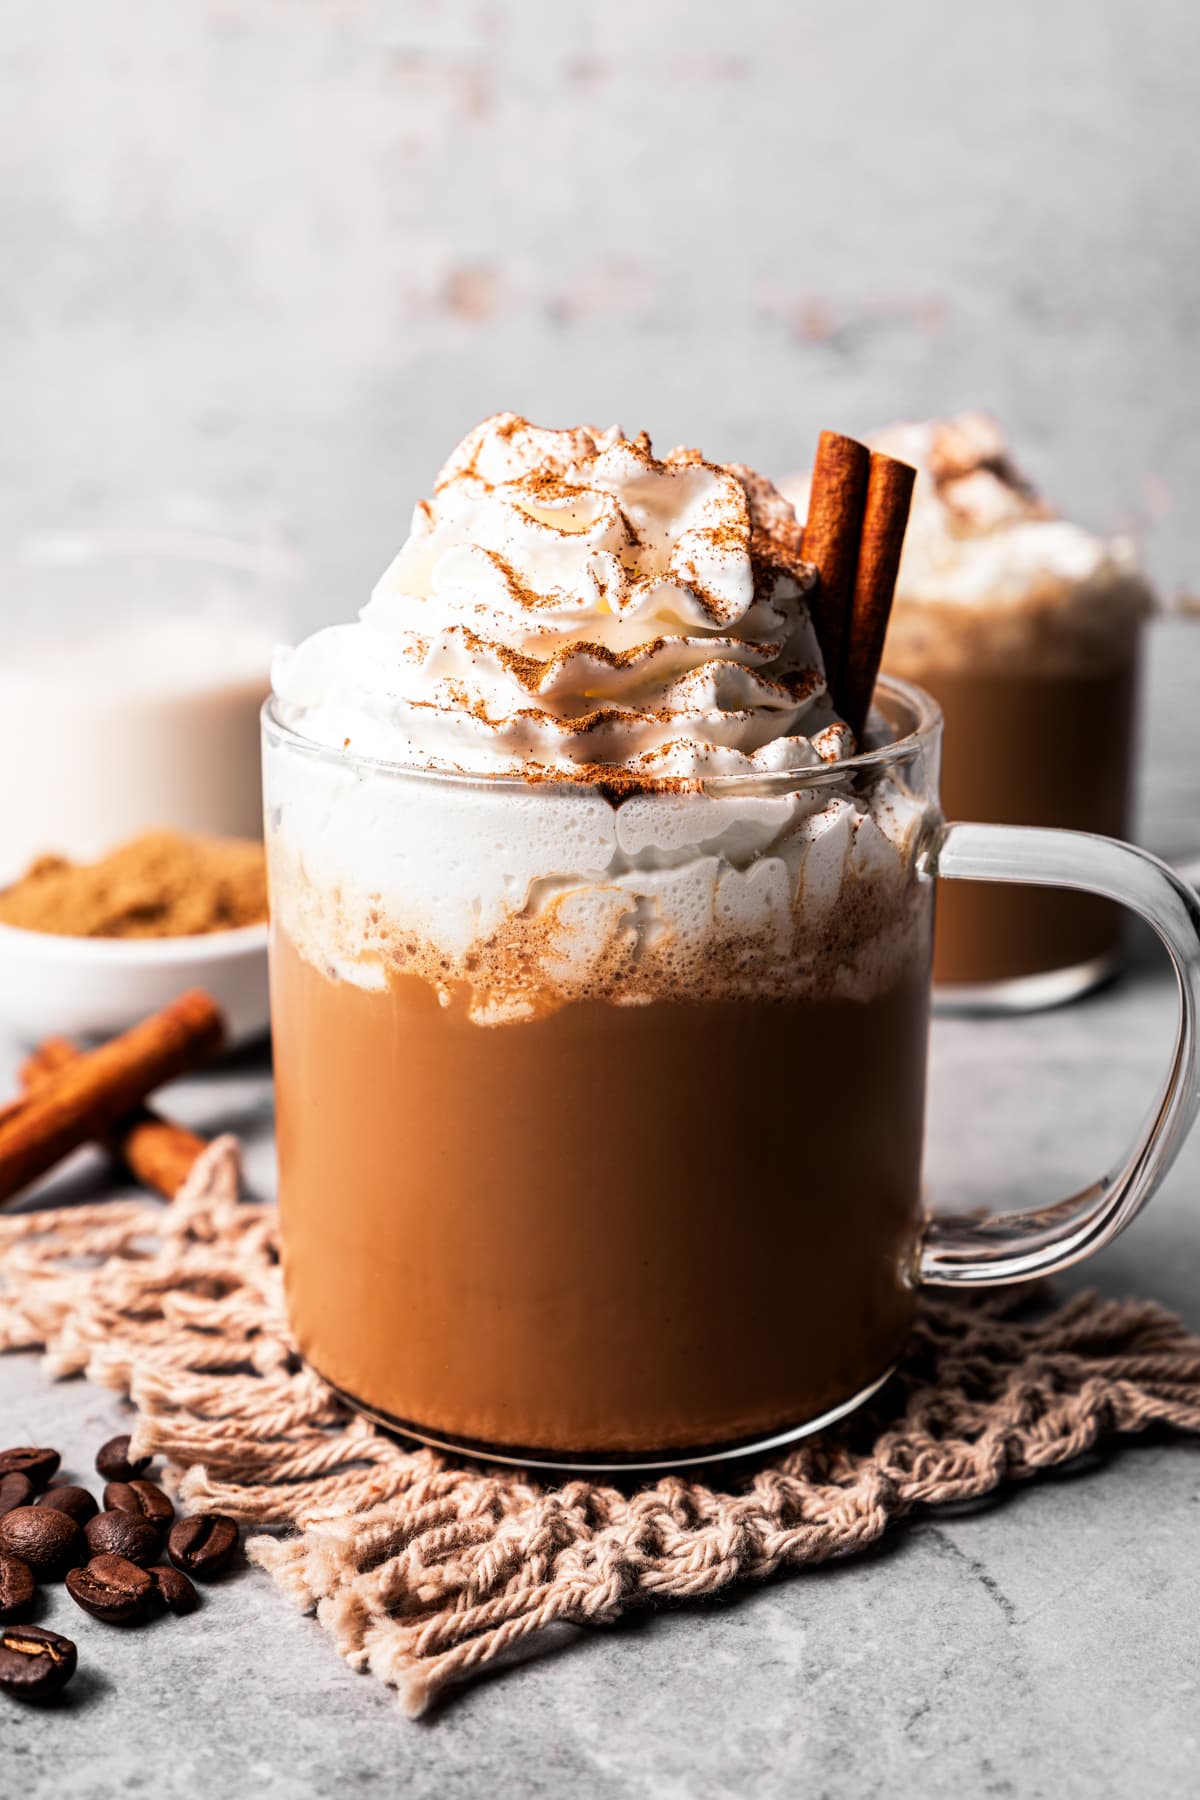 A cinnamon dolce latte in a glass mug garnished with whipped cream and a cinnamon stick, dusted with cinnamon, with a second latte in the background.